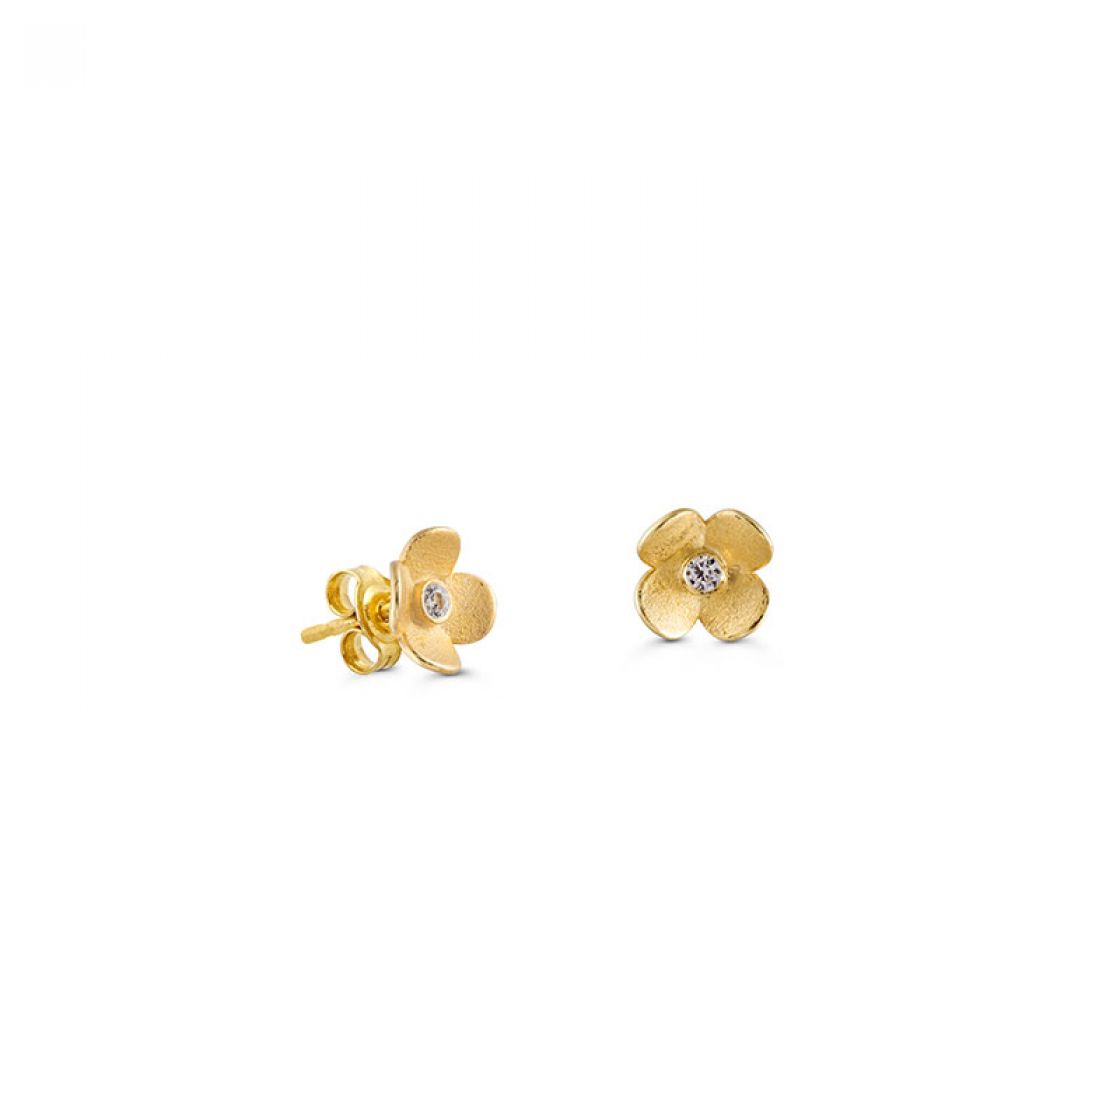 Gold handmade new blossoms accented with a zirkon stone.